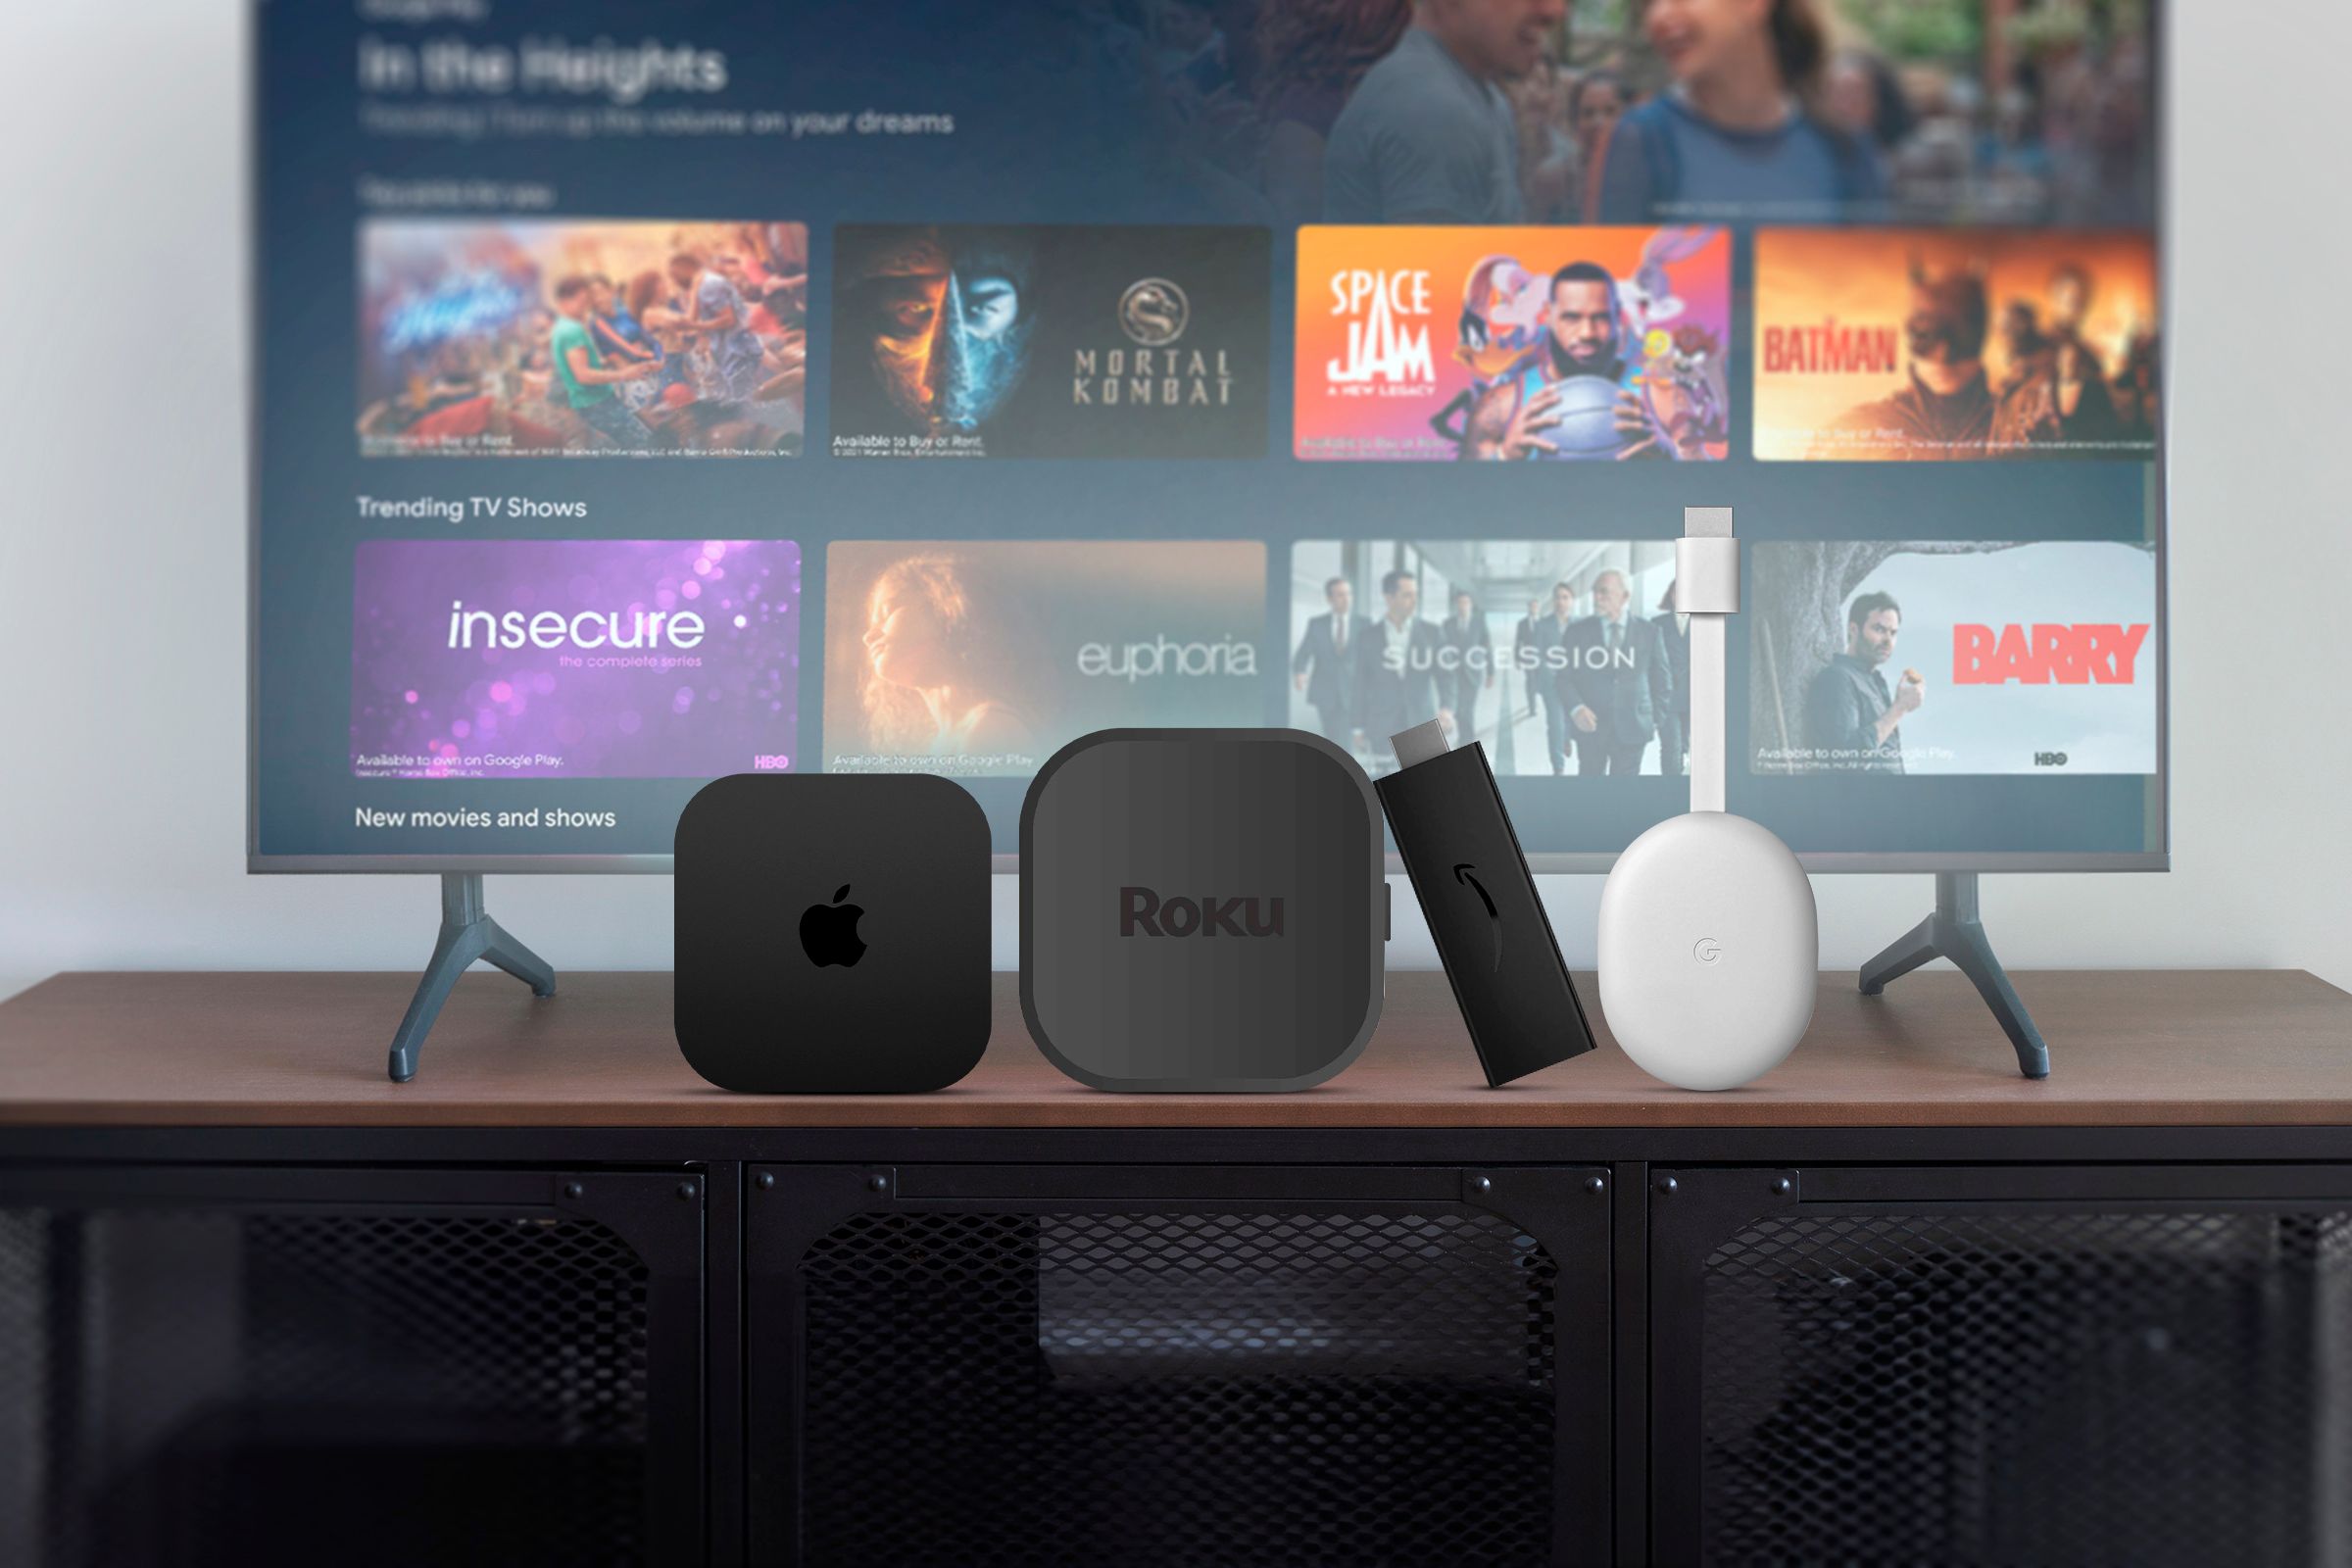 An Android TV with an Apple TV, Roku, Amazon Fire TV, and Chromecast positioned in front